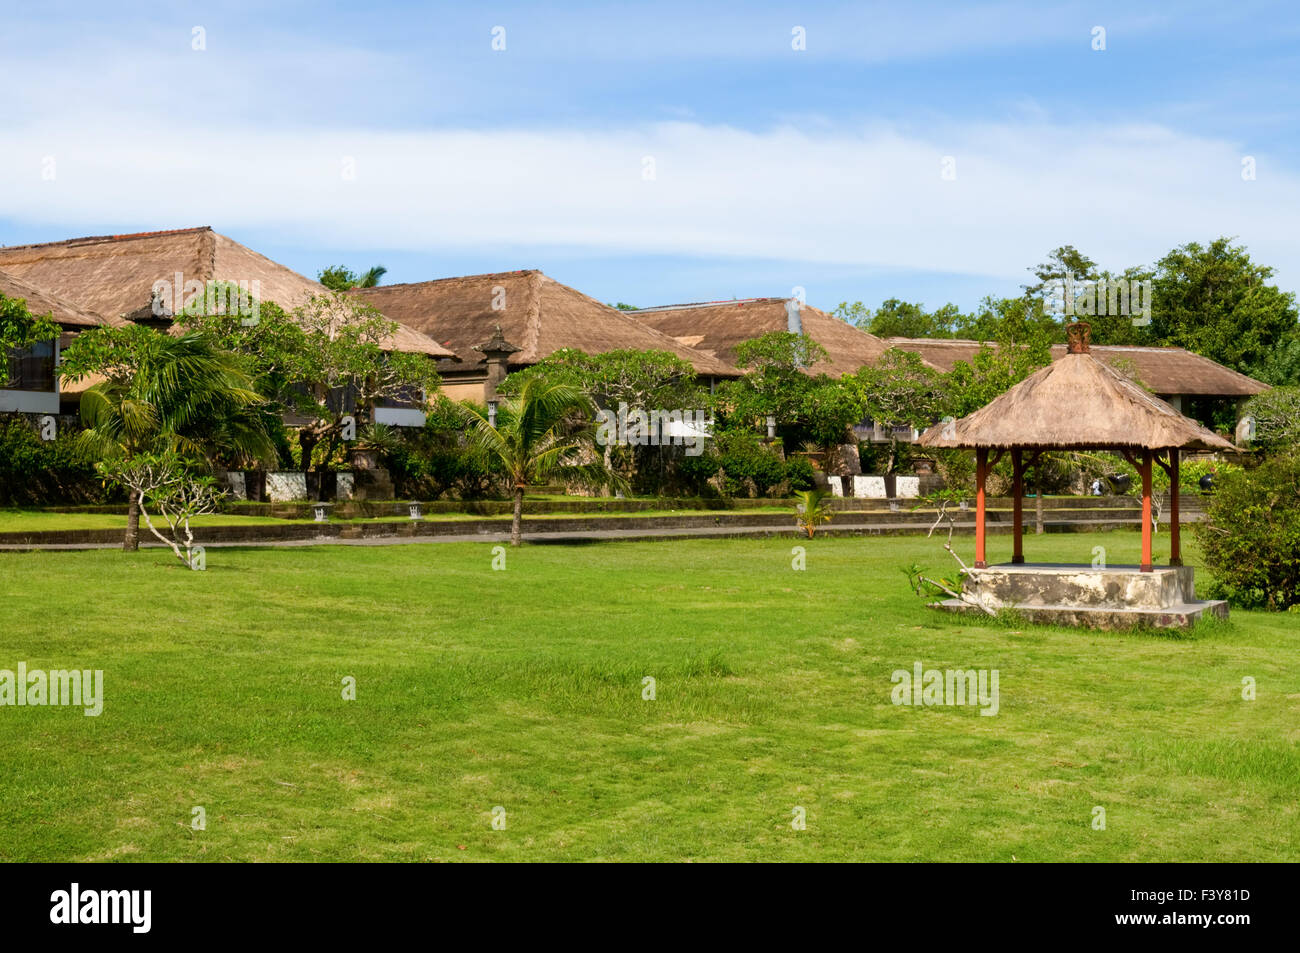 Villas and hut in green field of India Stock Photo